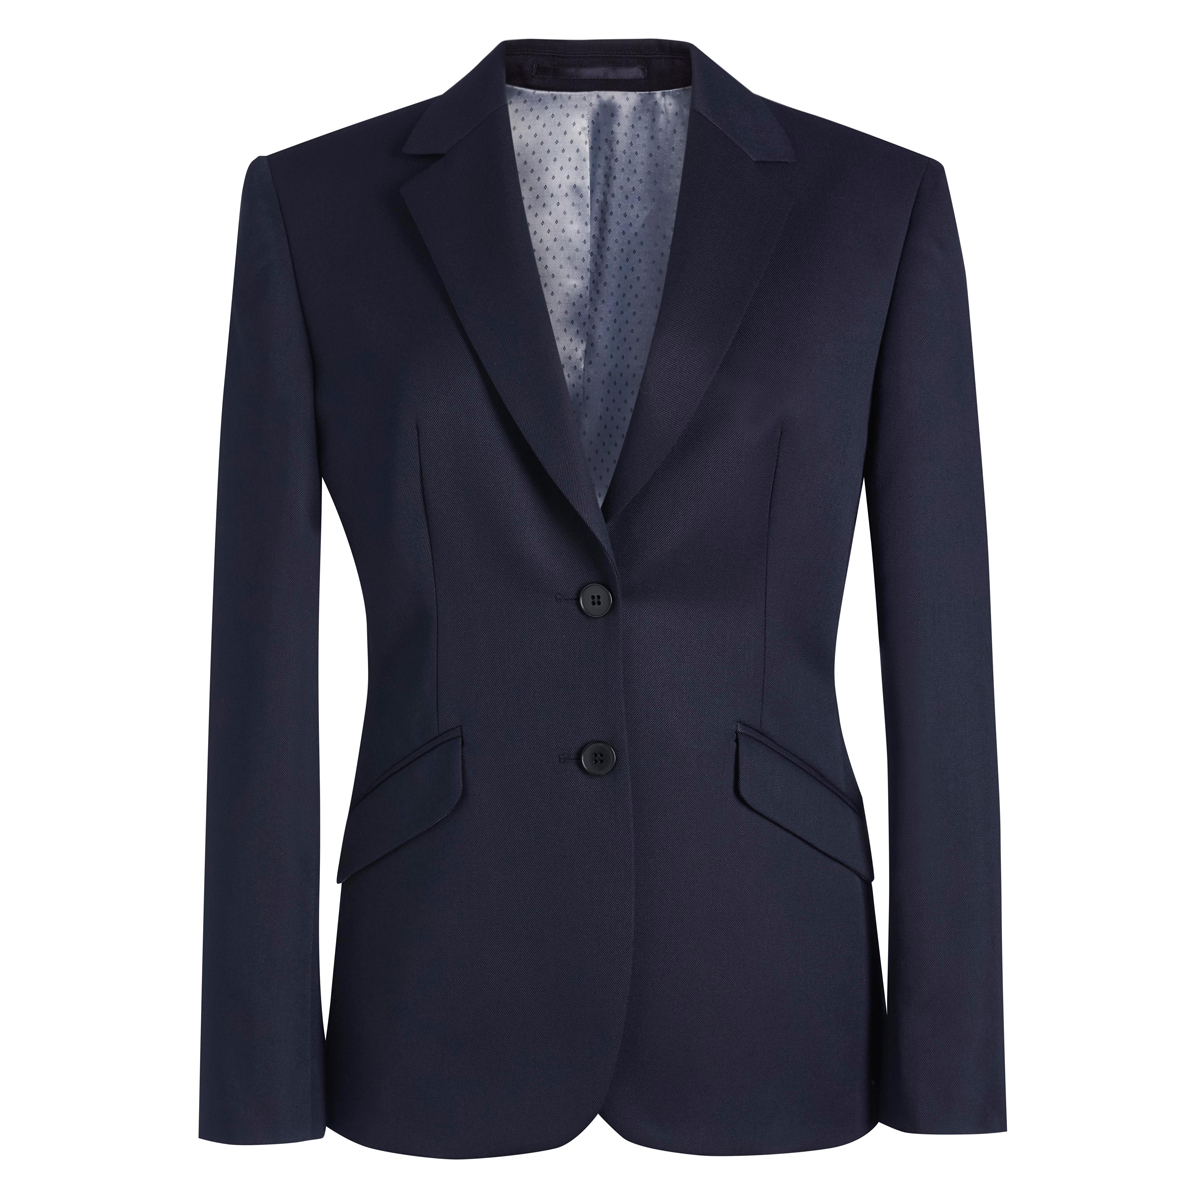 Hebe classic fit jacket navy 18r